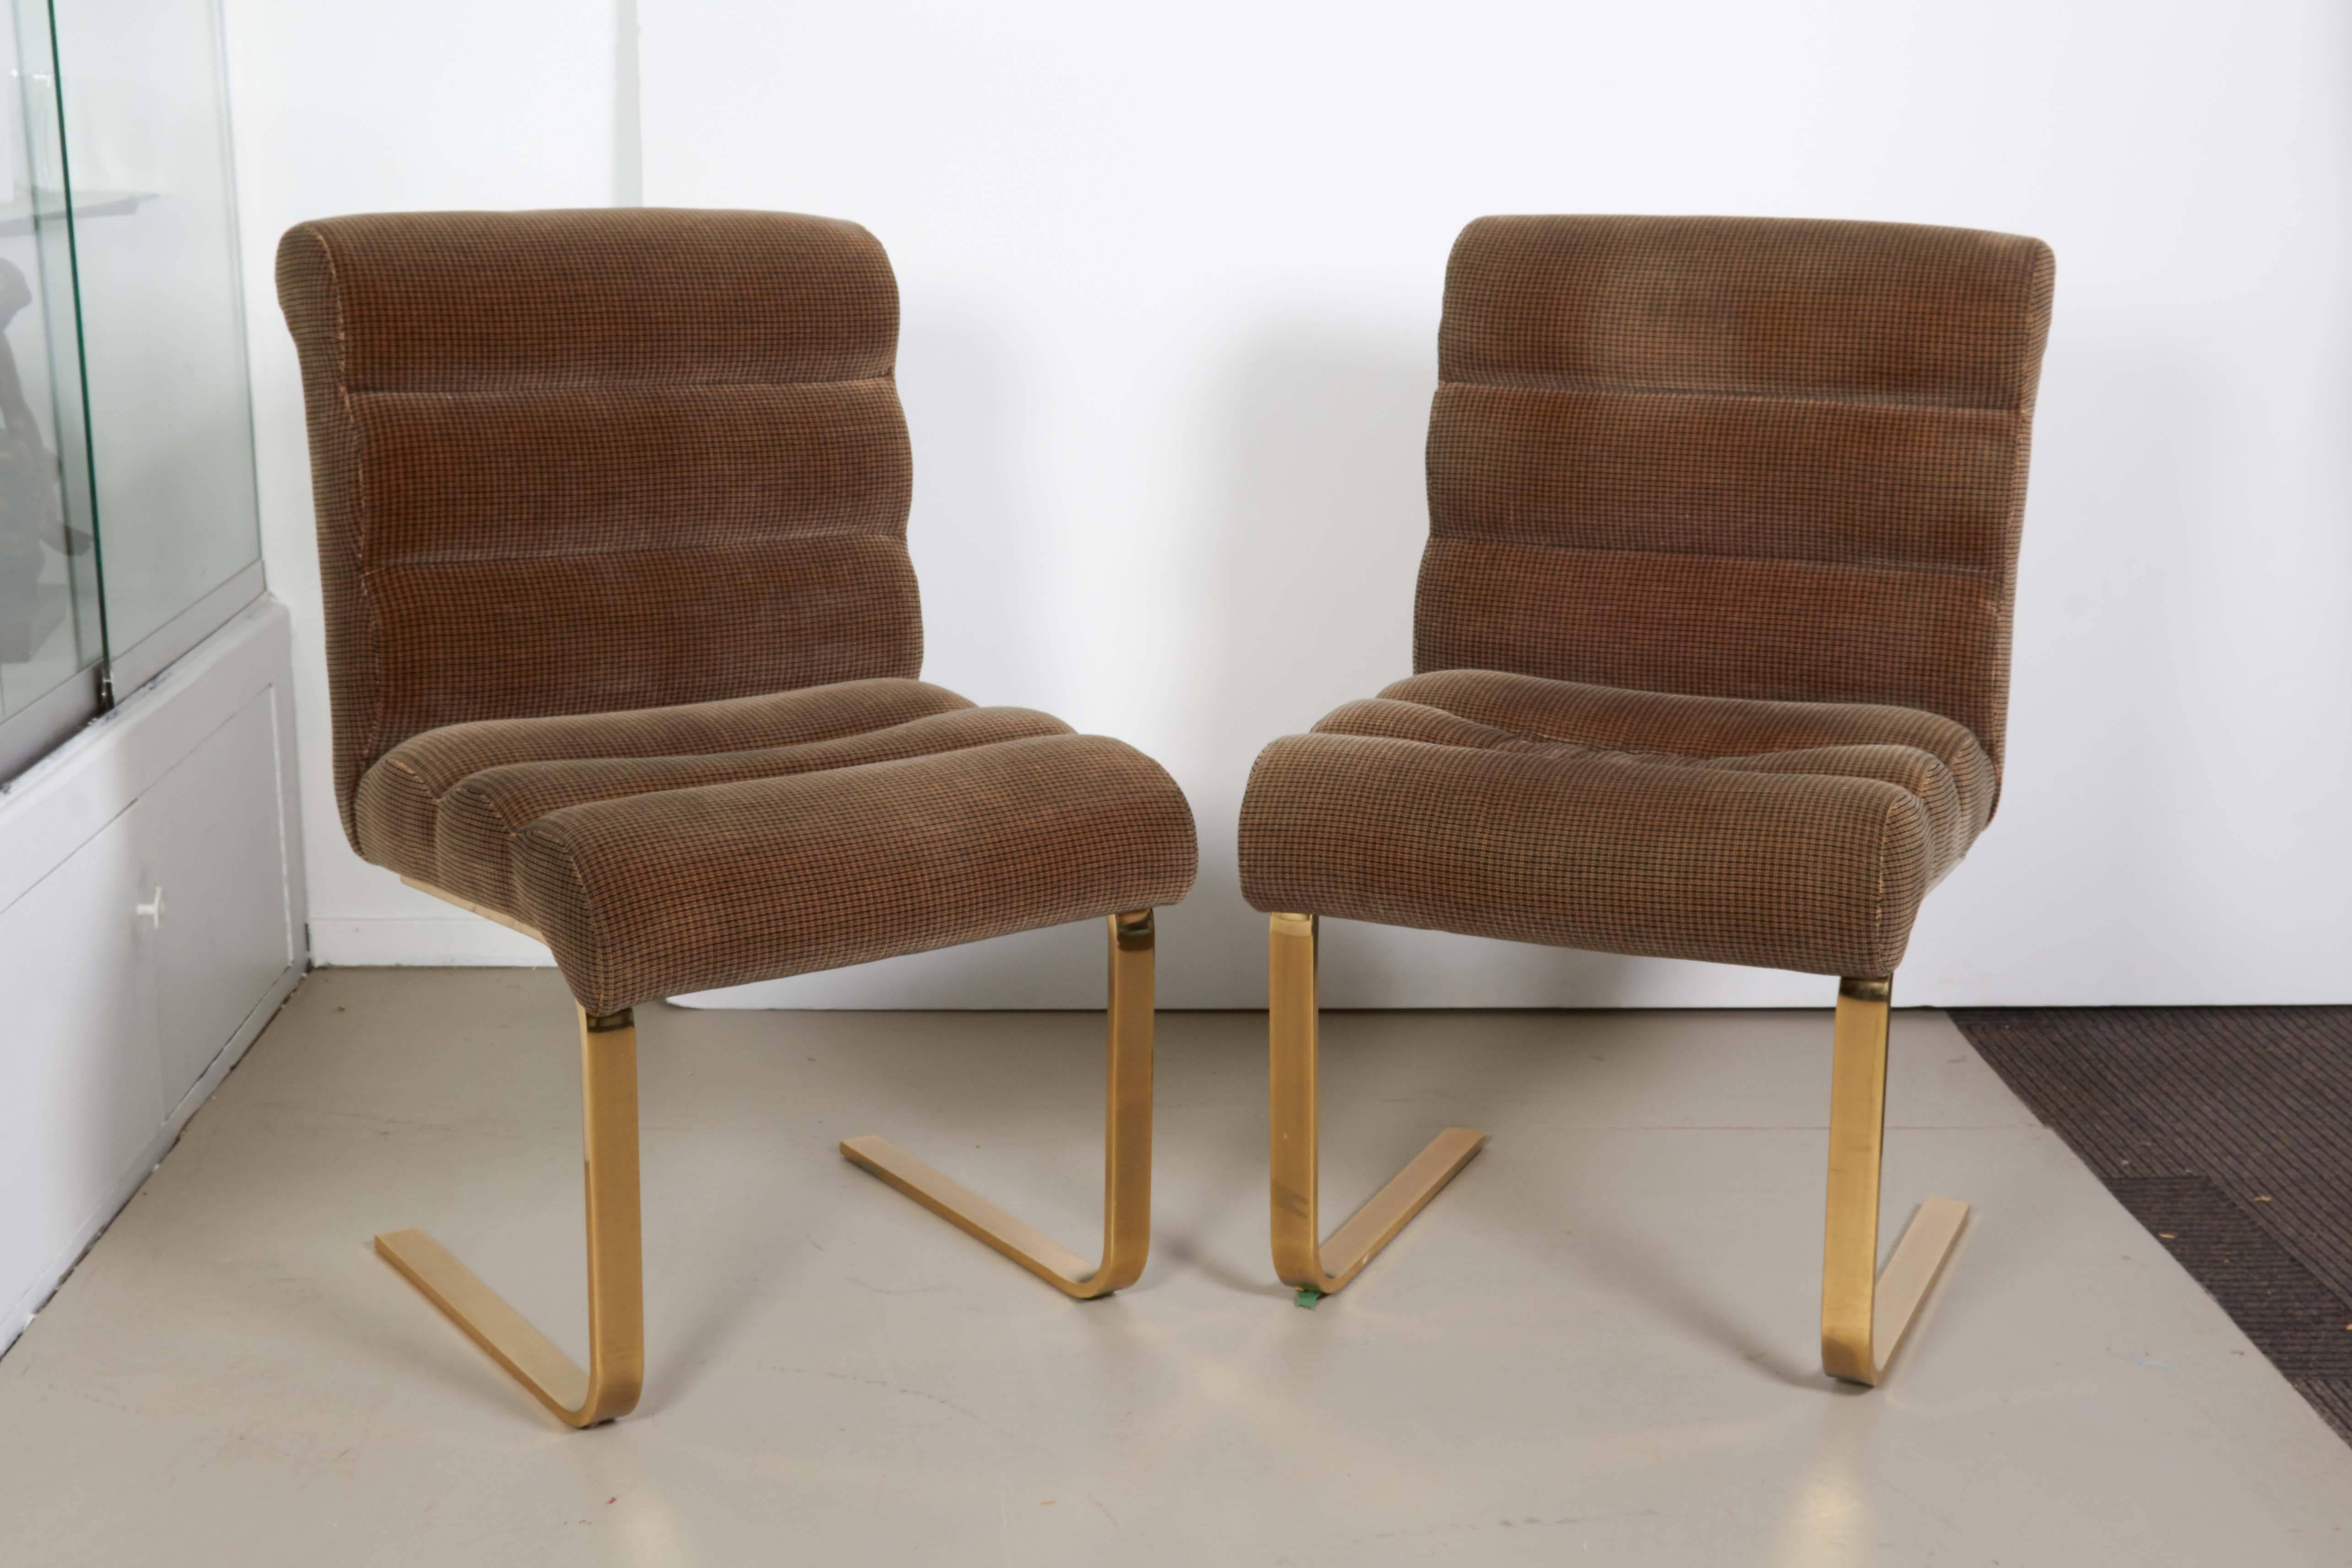 A set of six 'Lugano' dining chairs by designer Frank Mariani, manufactured by the Pace Collection, circa 1970s, upholstered backs and seats on cantilever bases in antiqued brass. Very good vintage condition, consistent with age and use; requires